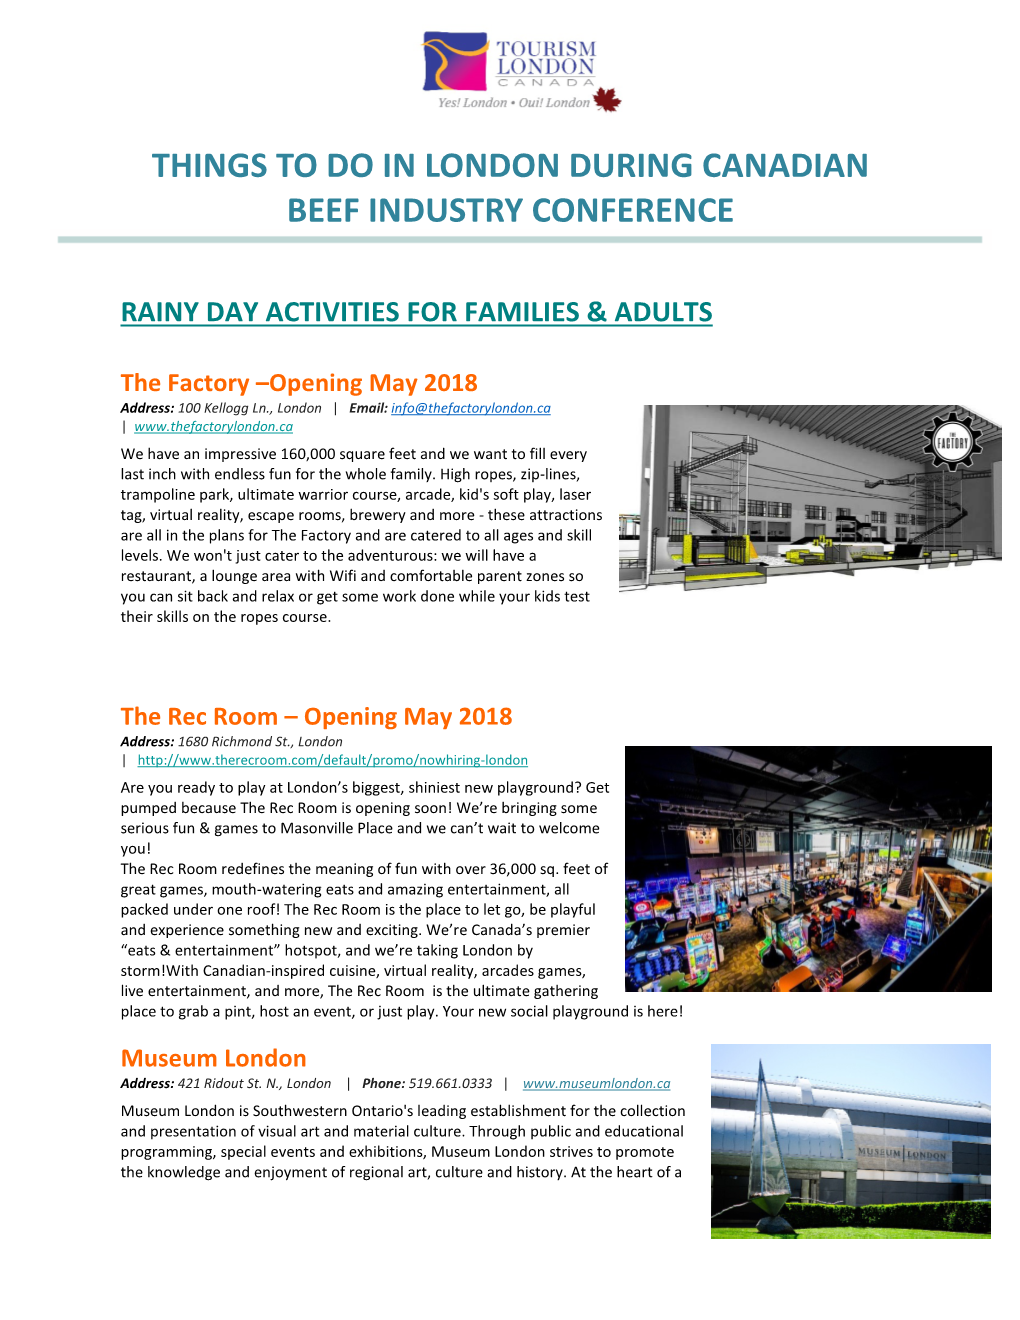 Things to Do in London During Canadian Beef Industry Conference